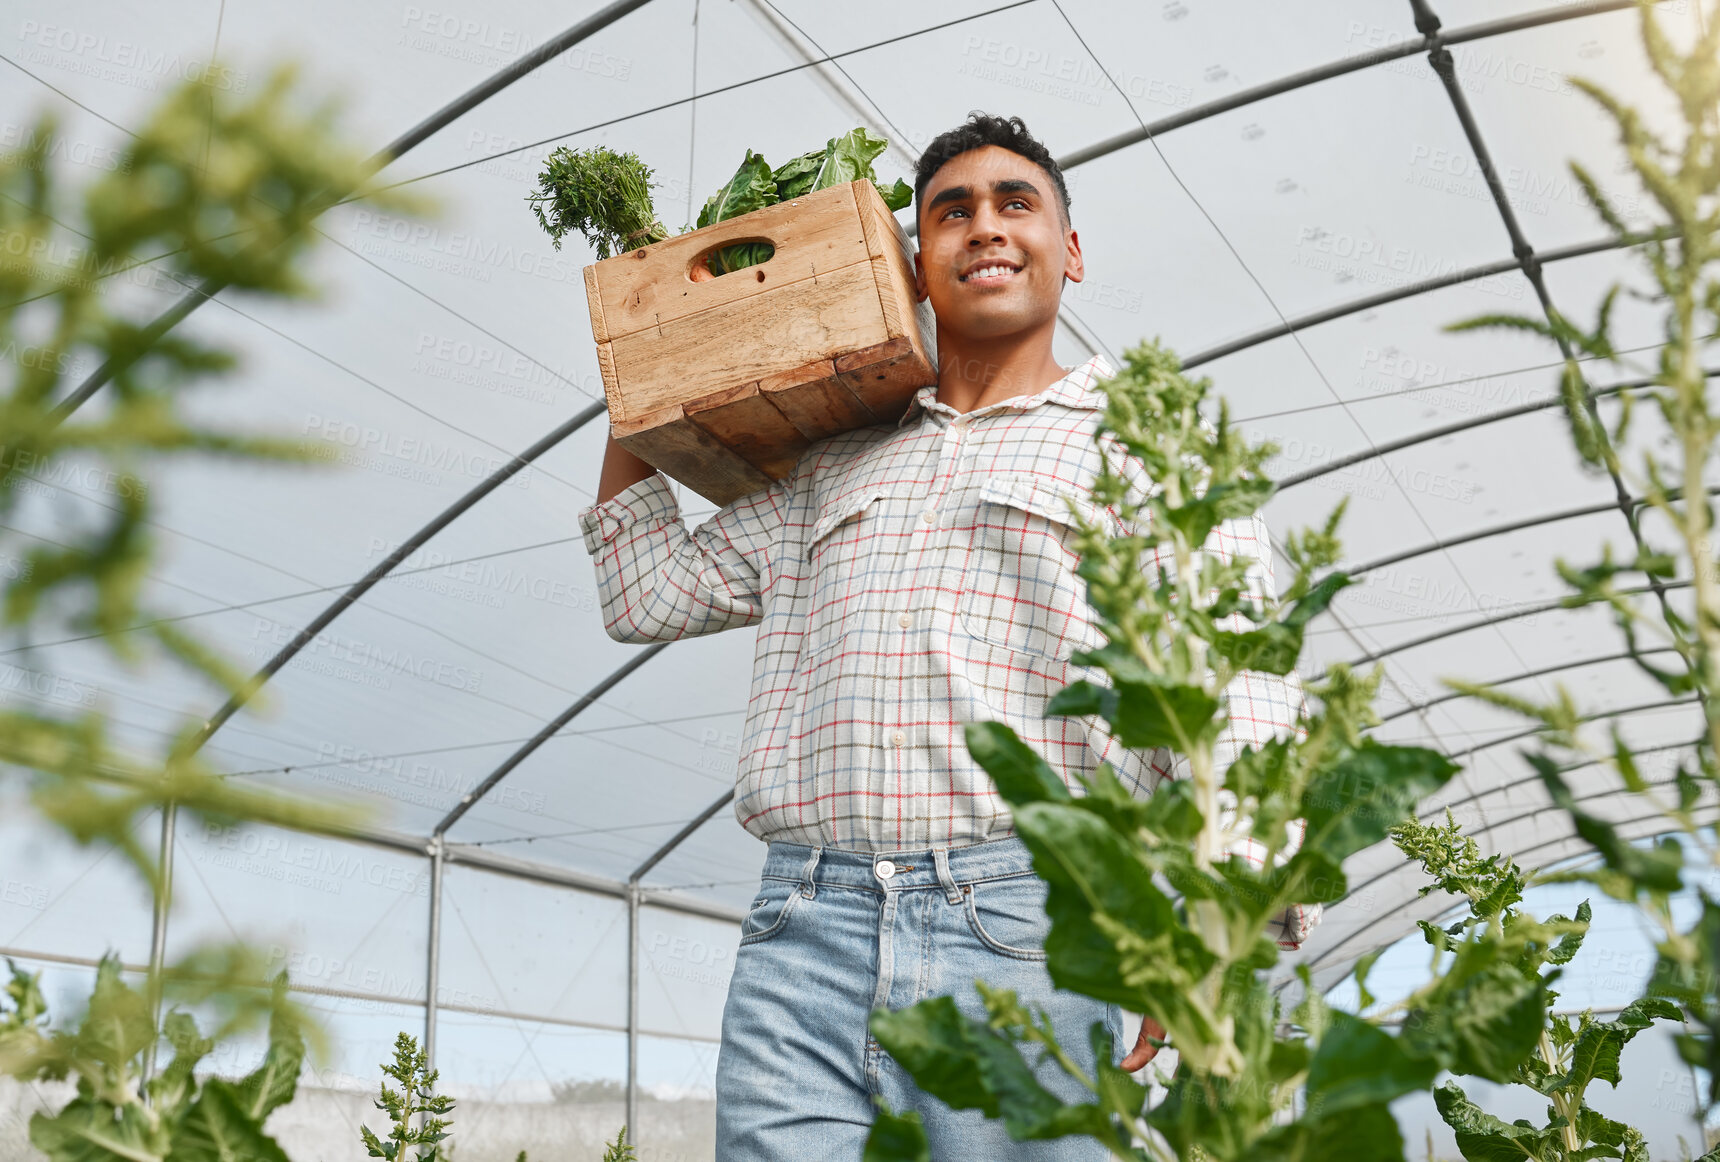 Buy stock photo Shot of a young man holding a crate of fresh produce while working on a farm